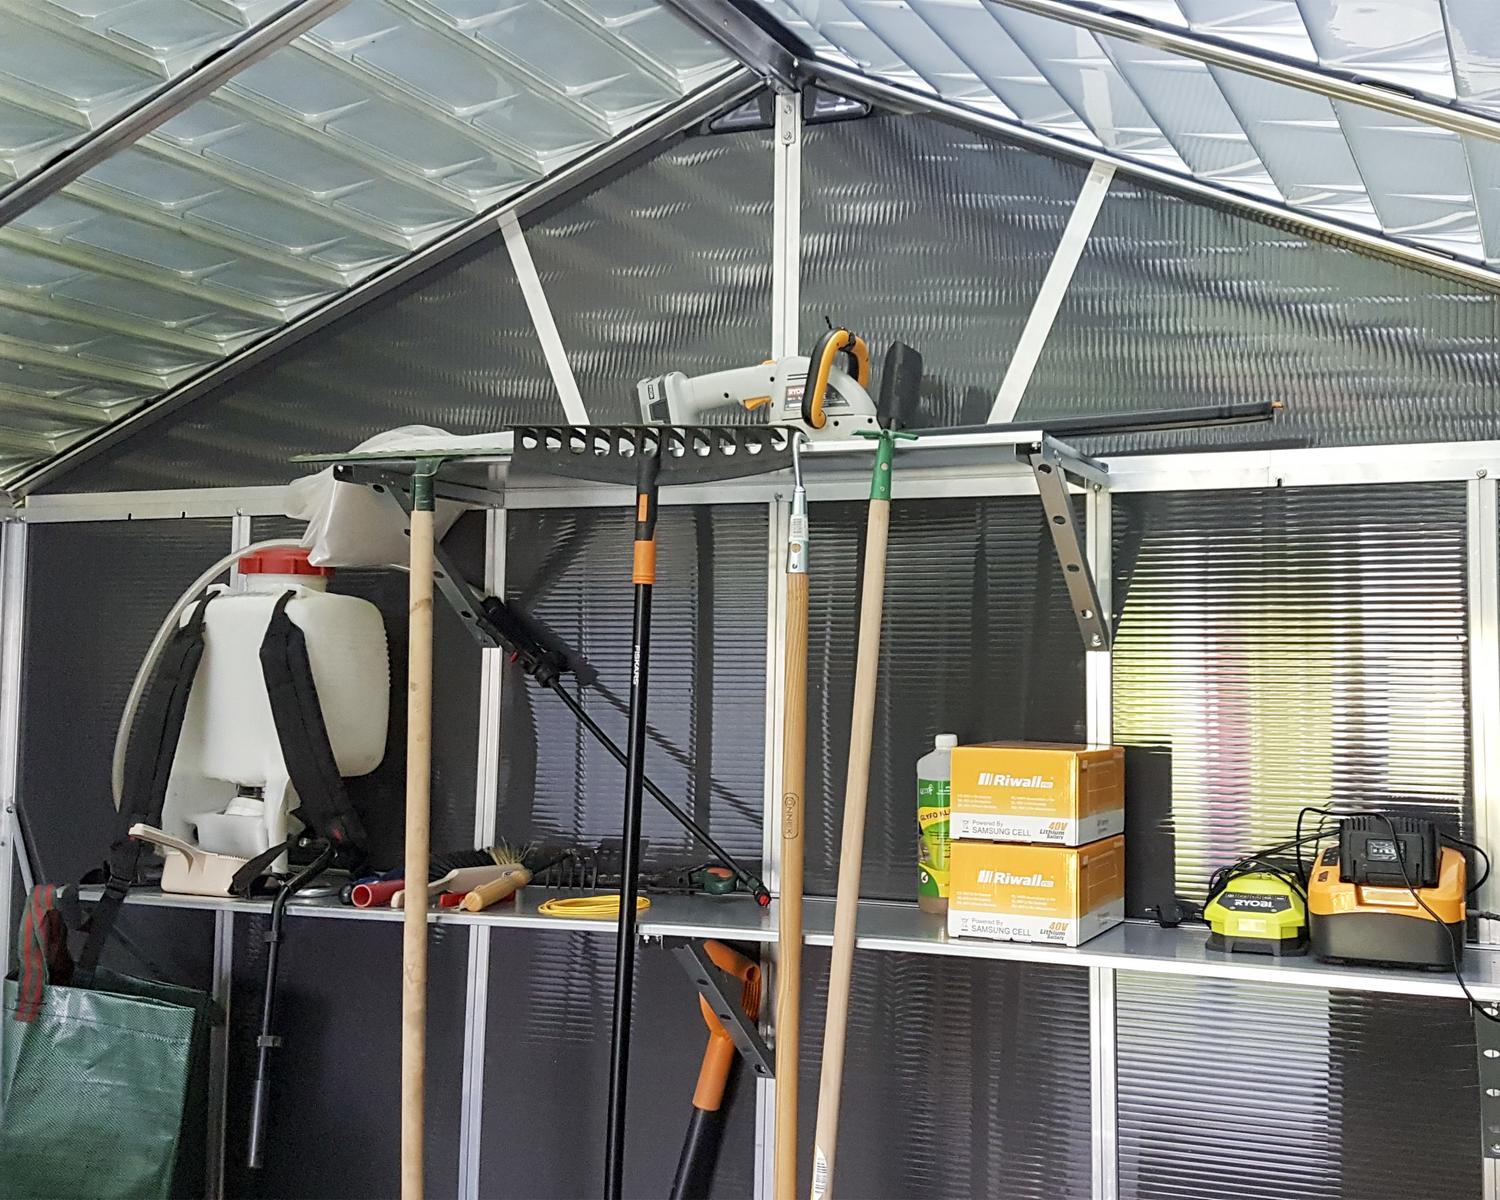 organizing of tools in a large storage shed with a skylight roof